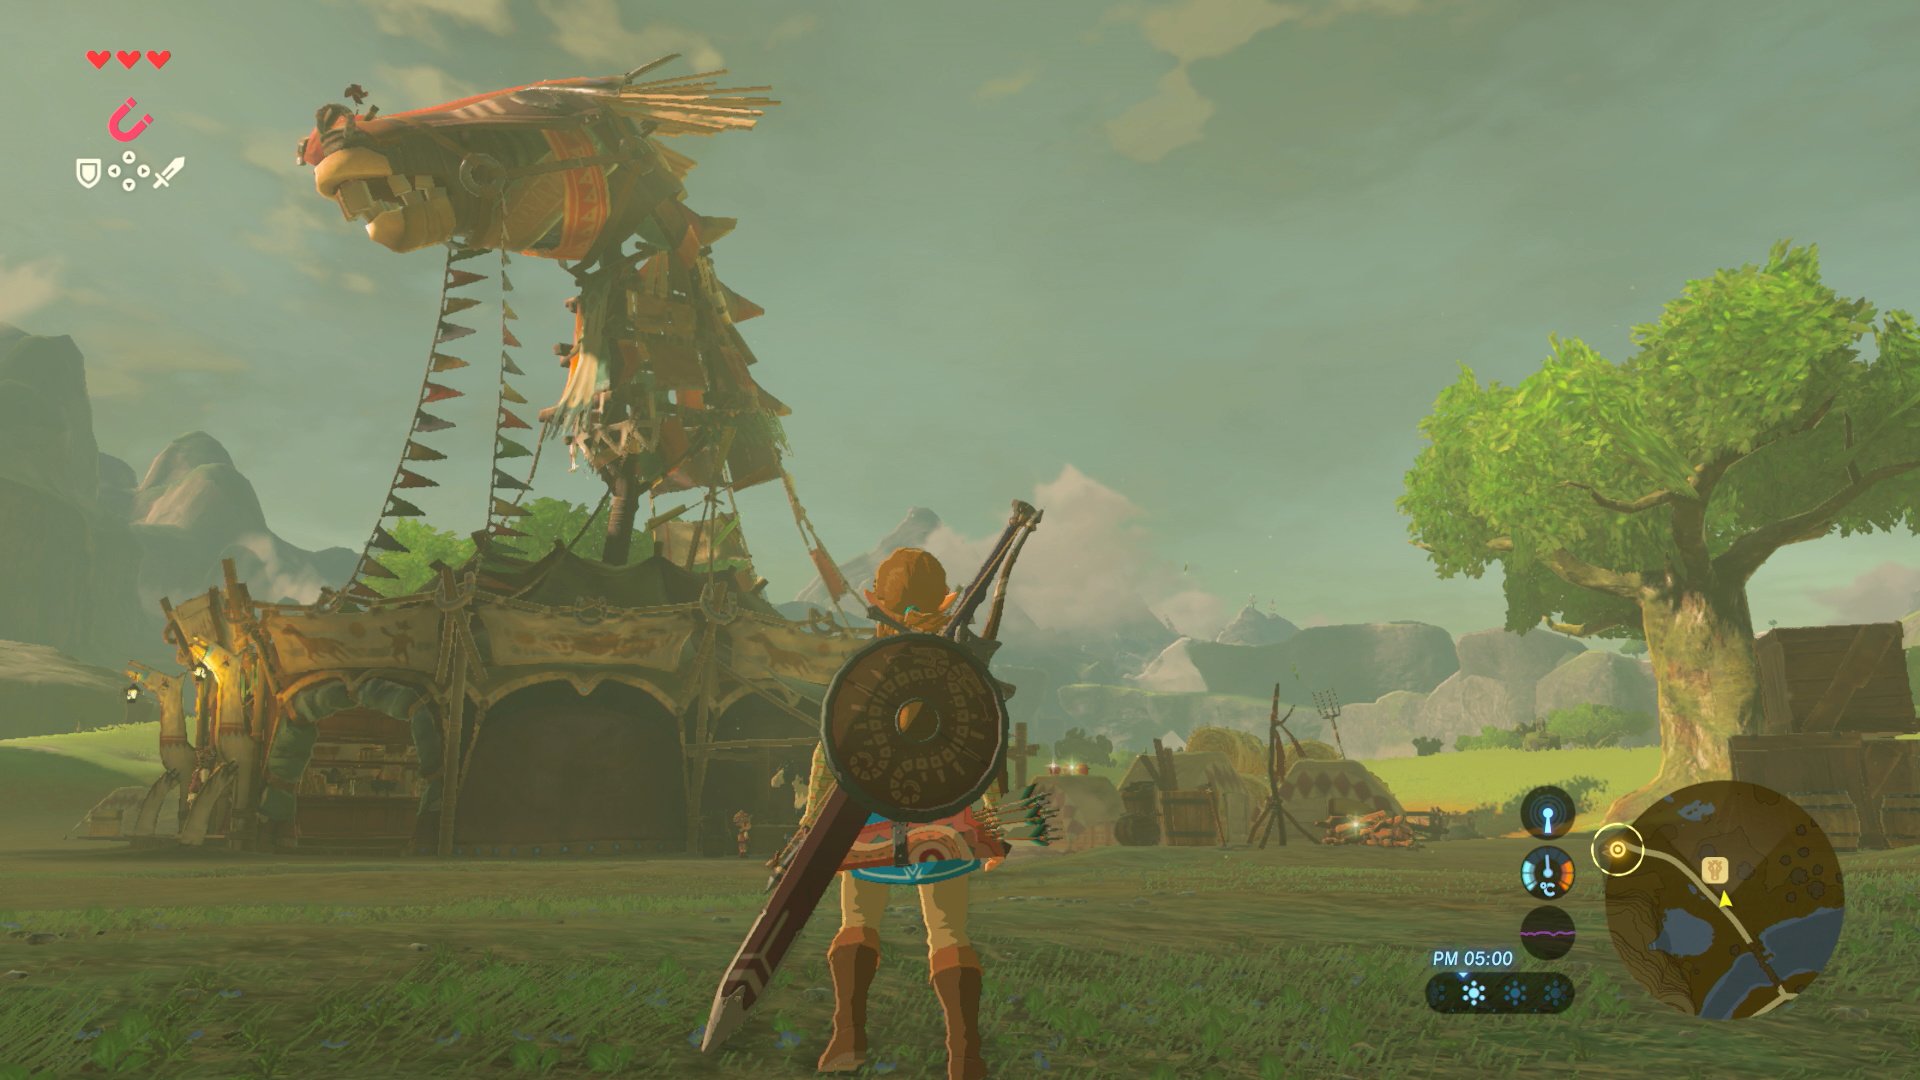 Review: The Legend of Zelda: Breath of the Wild